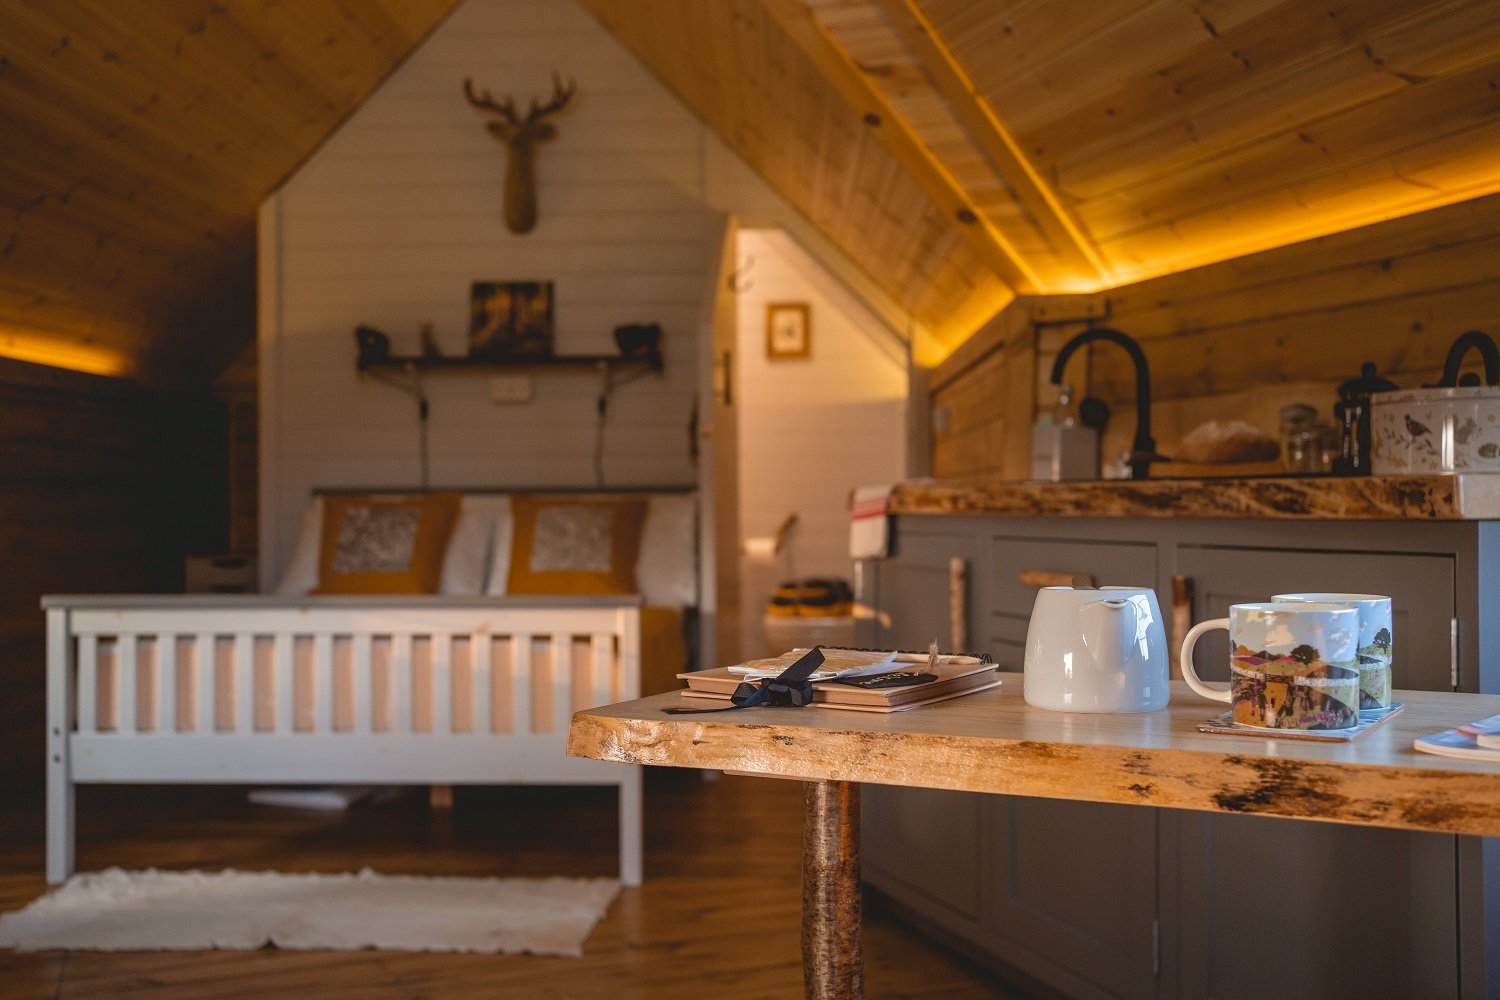 Interior of a log cabin with bedroom, kitchen and bathroom